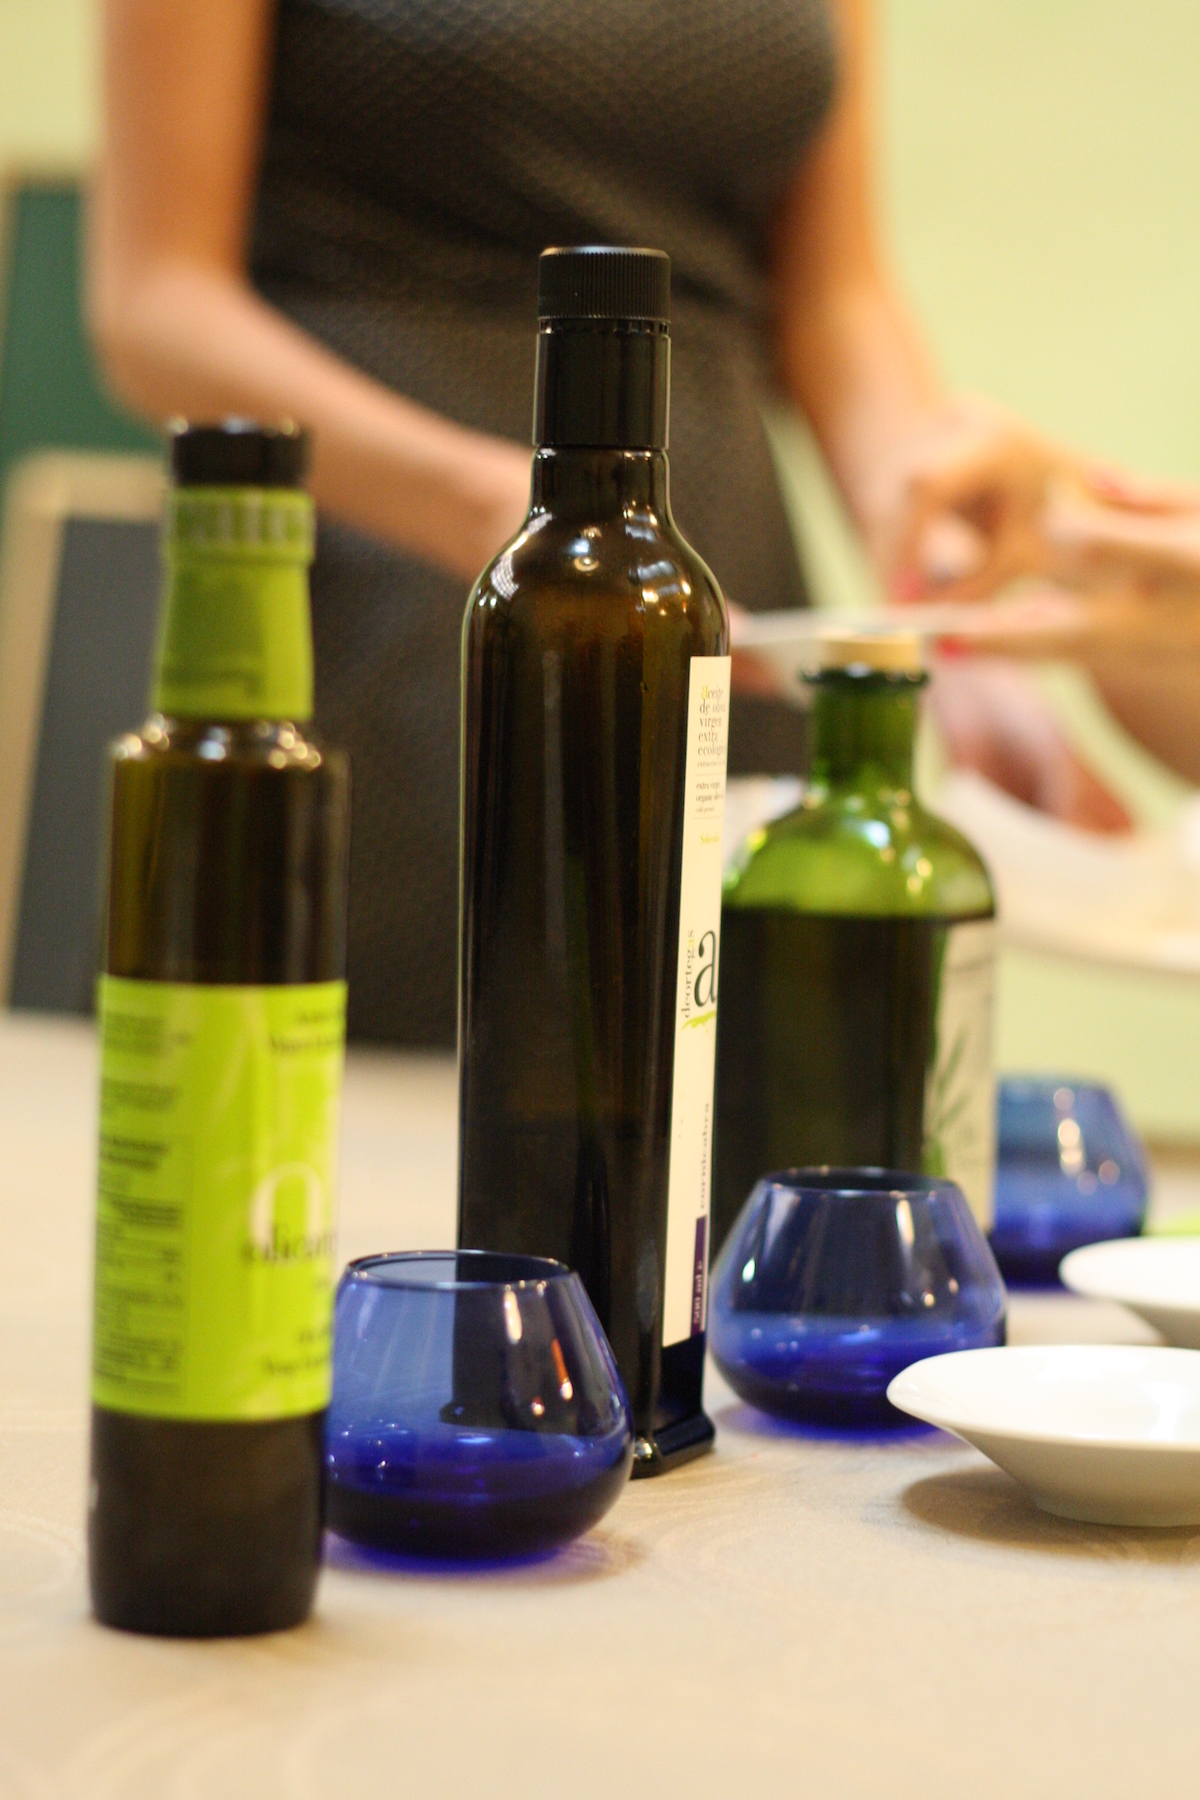 Three bottles of olive oil next to blue tasting cups.